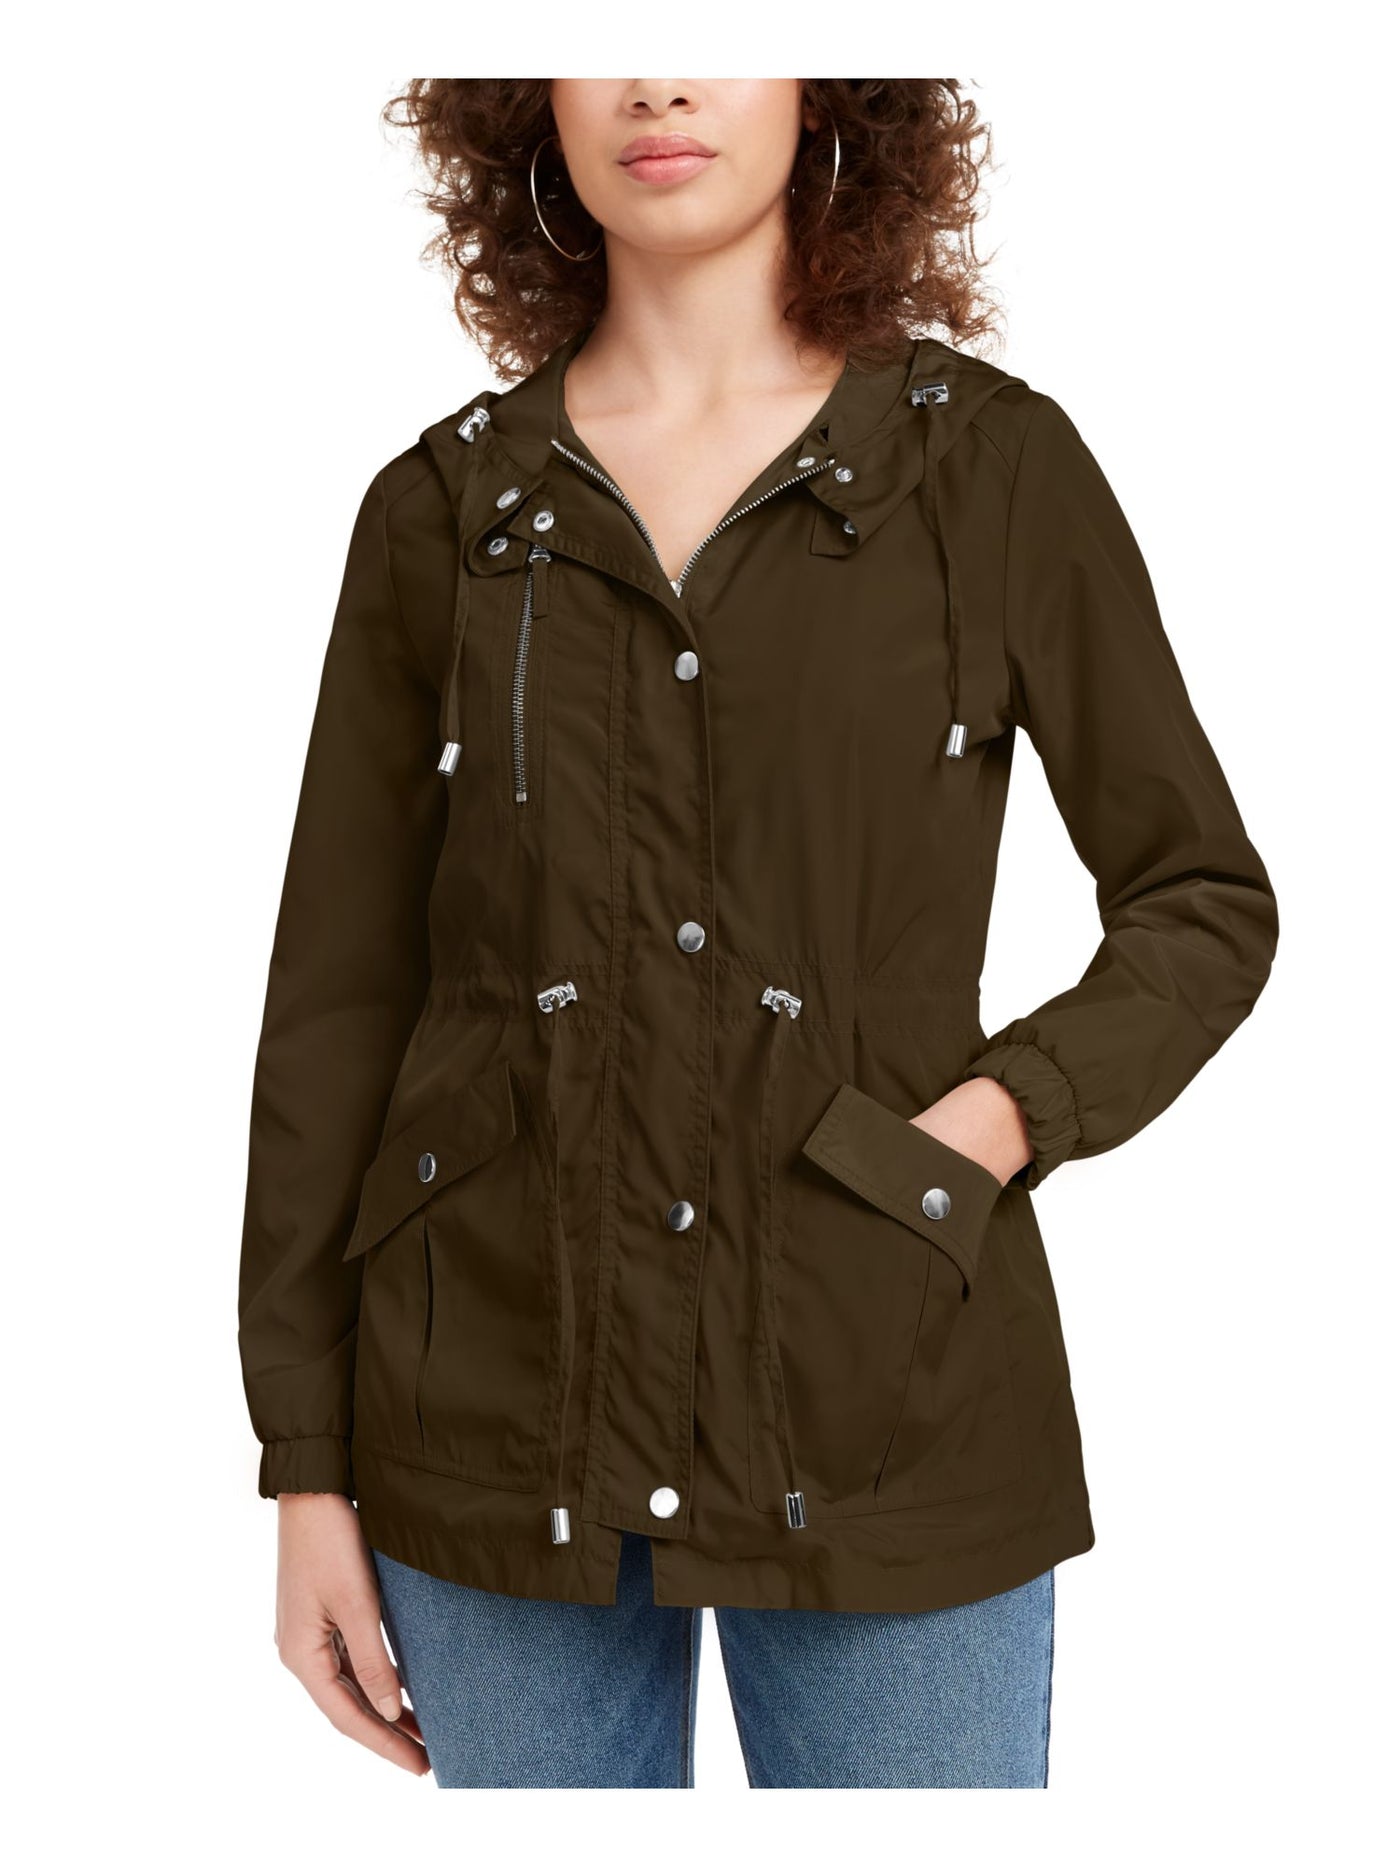 MARALYN & ME Womens Green Button Down Jacket S